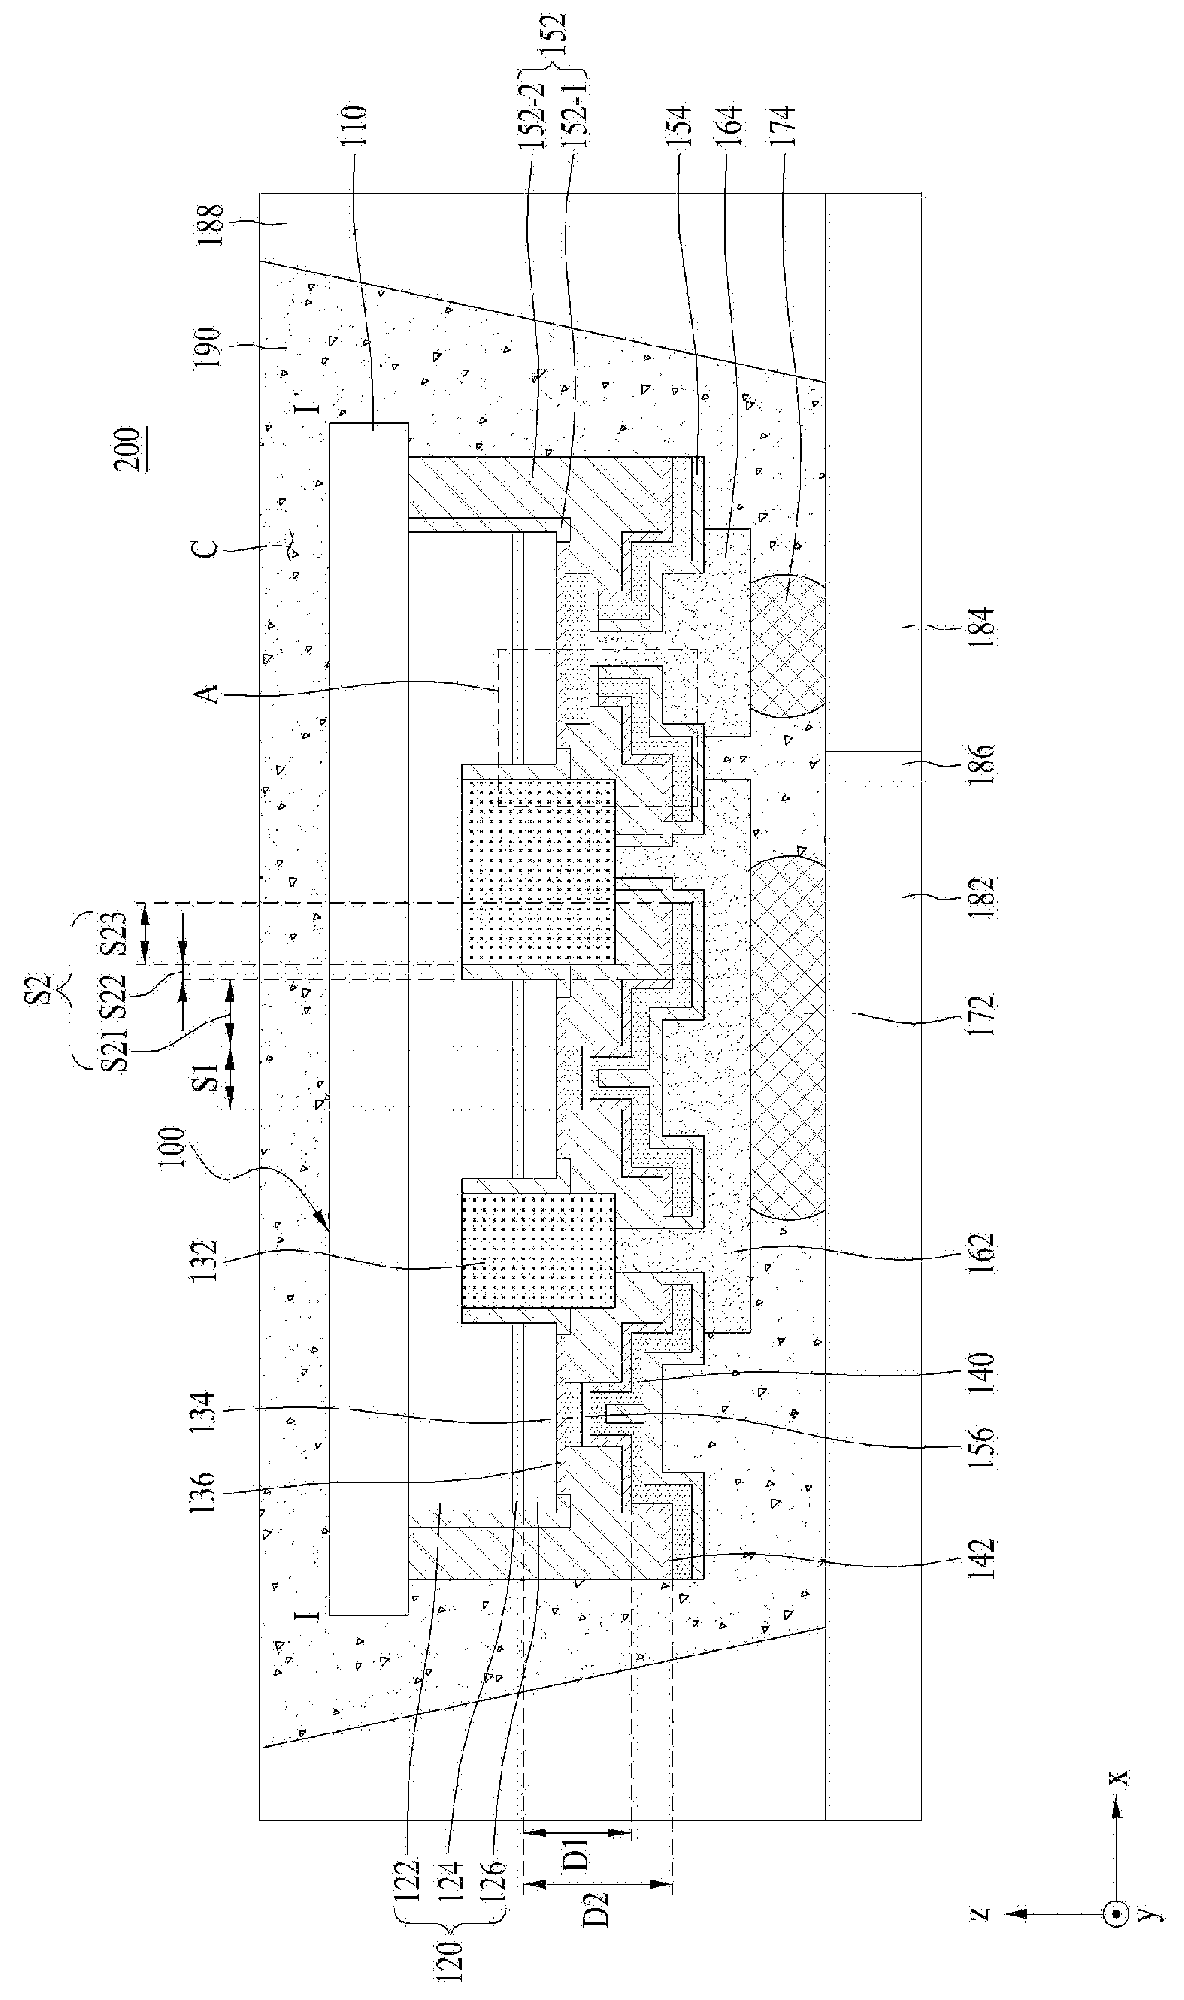 Light emitting device, light emitting device package including the device, and lighting apparatus including the package